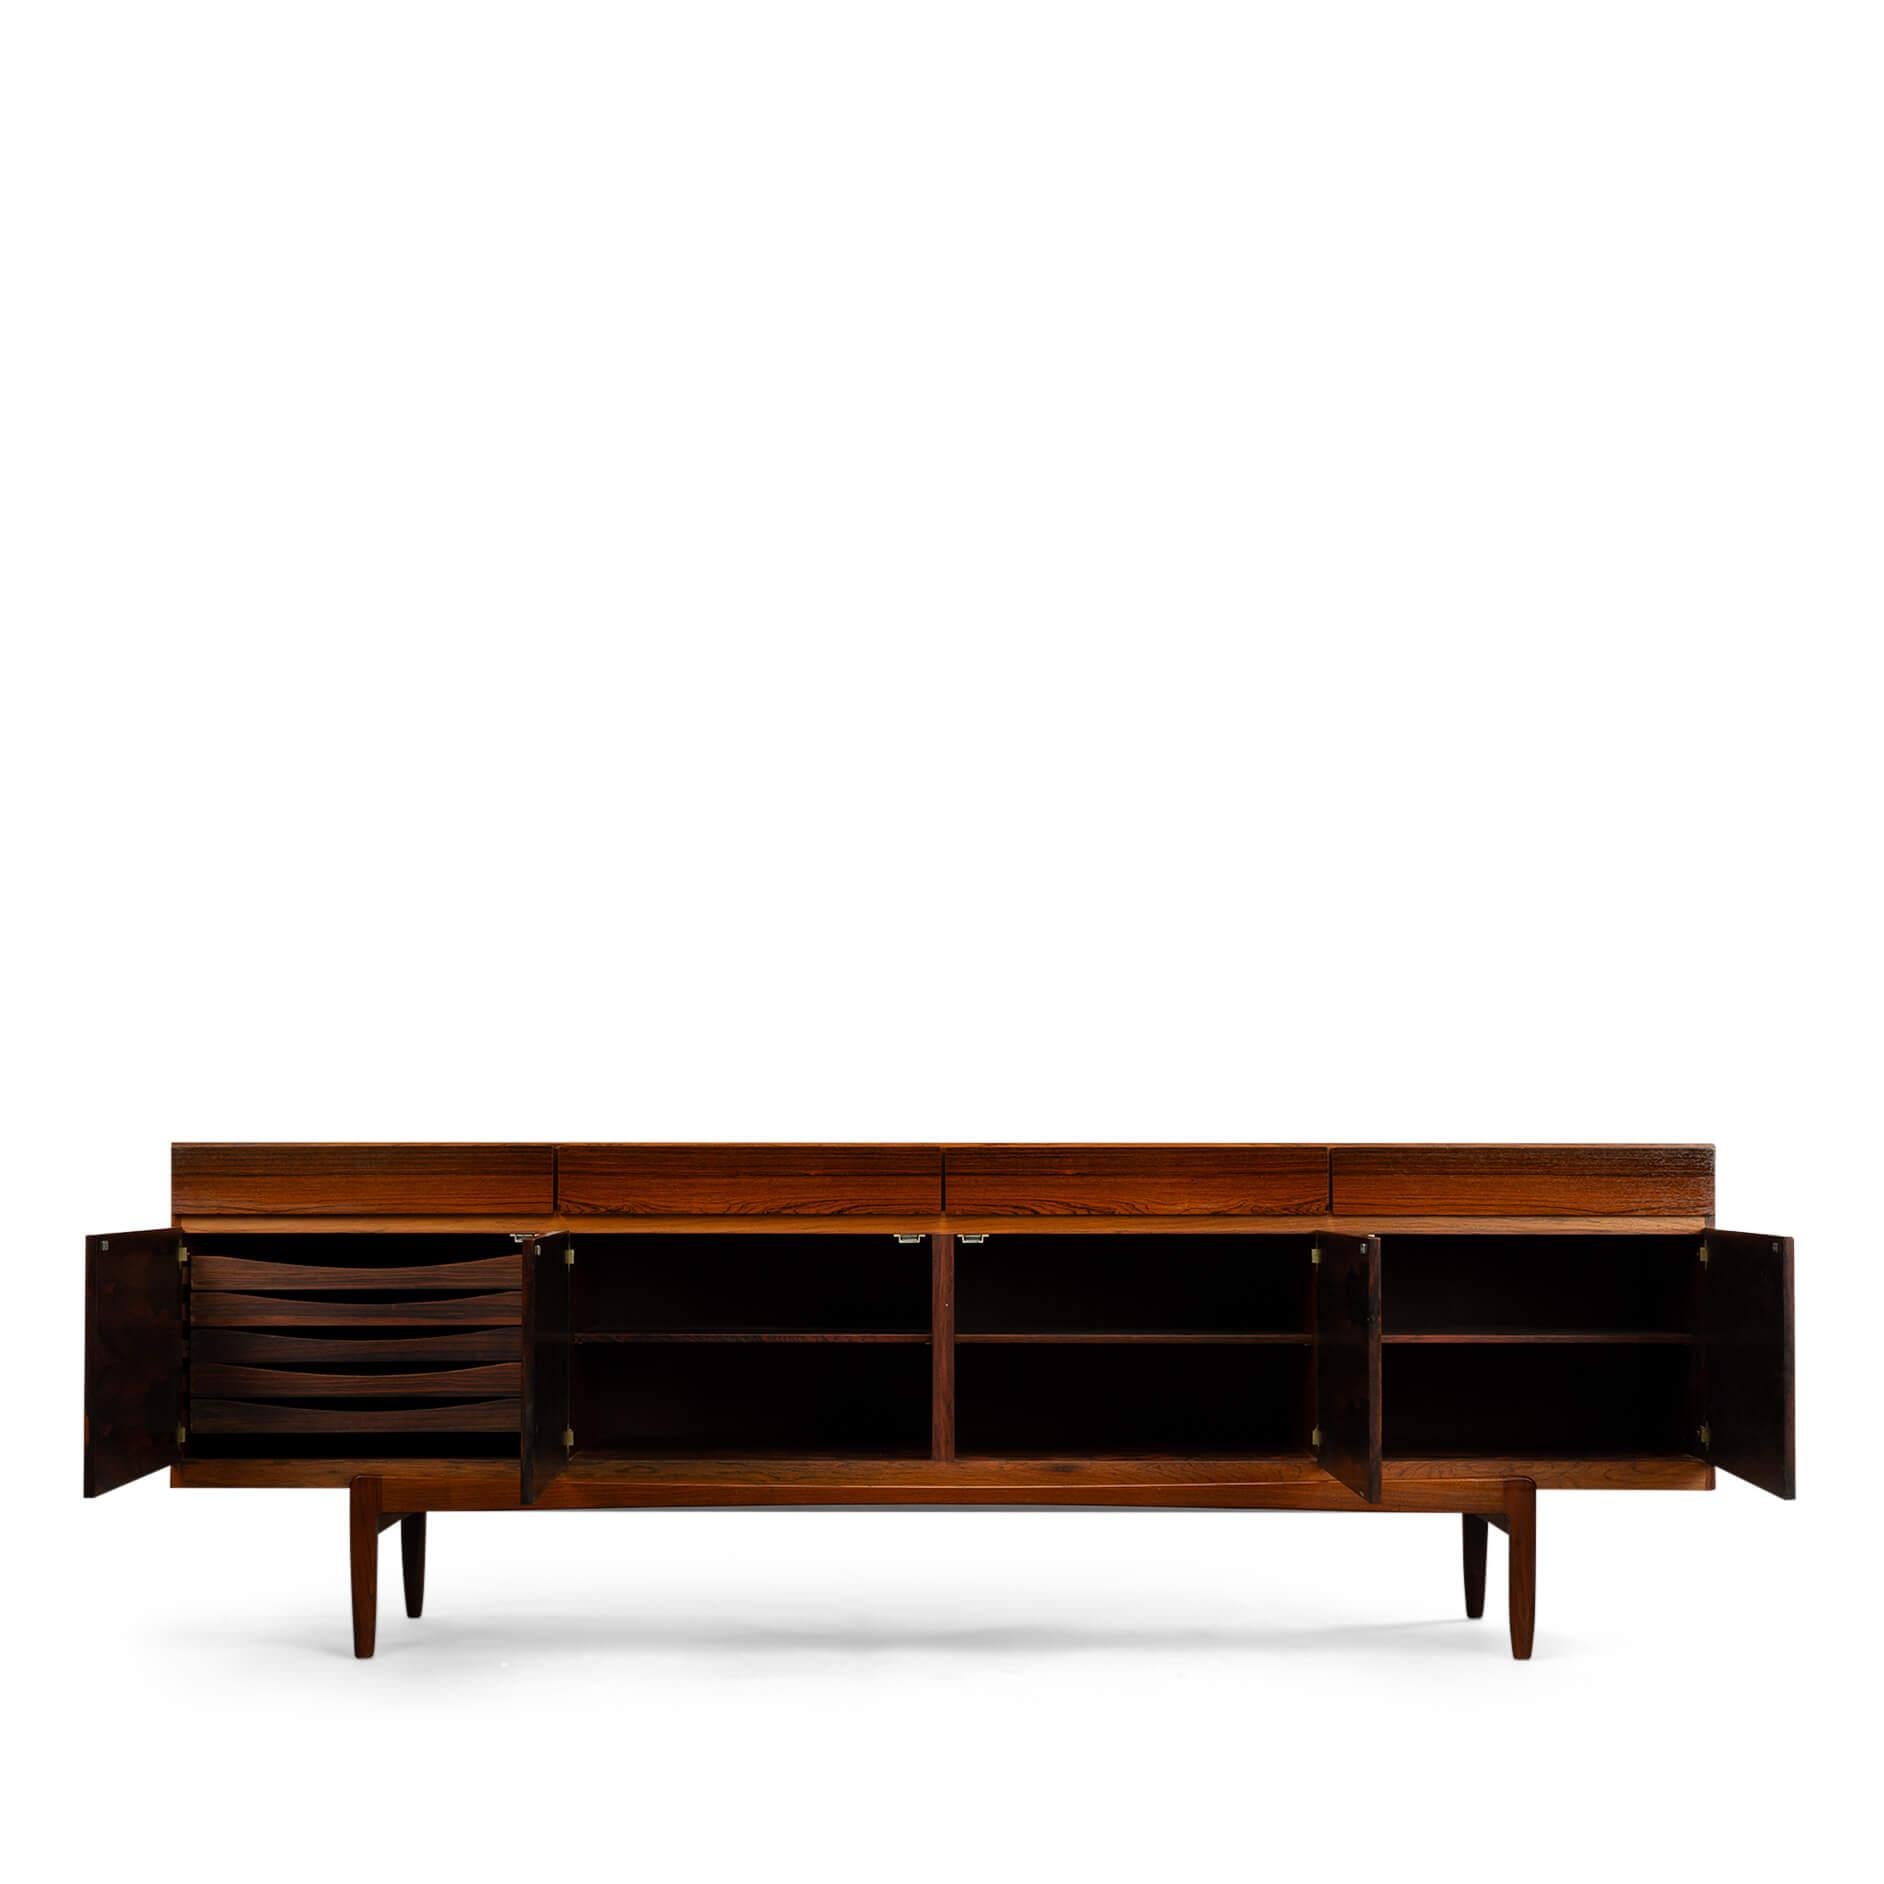 Vintage sideboard: FA66
This Ib Kofod Larsen FA66 can be considered royalty among Danish mid-century design credenzas. With an absolute minimum of design frills, no grips, everything serving one purpose, visual shock and awe. Segmented in four